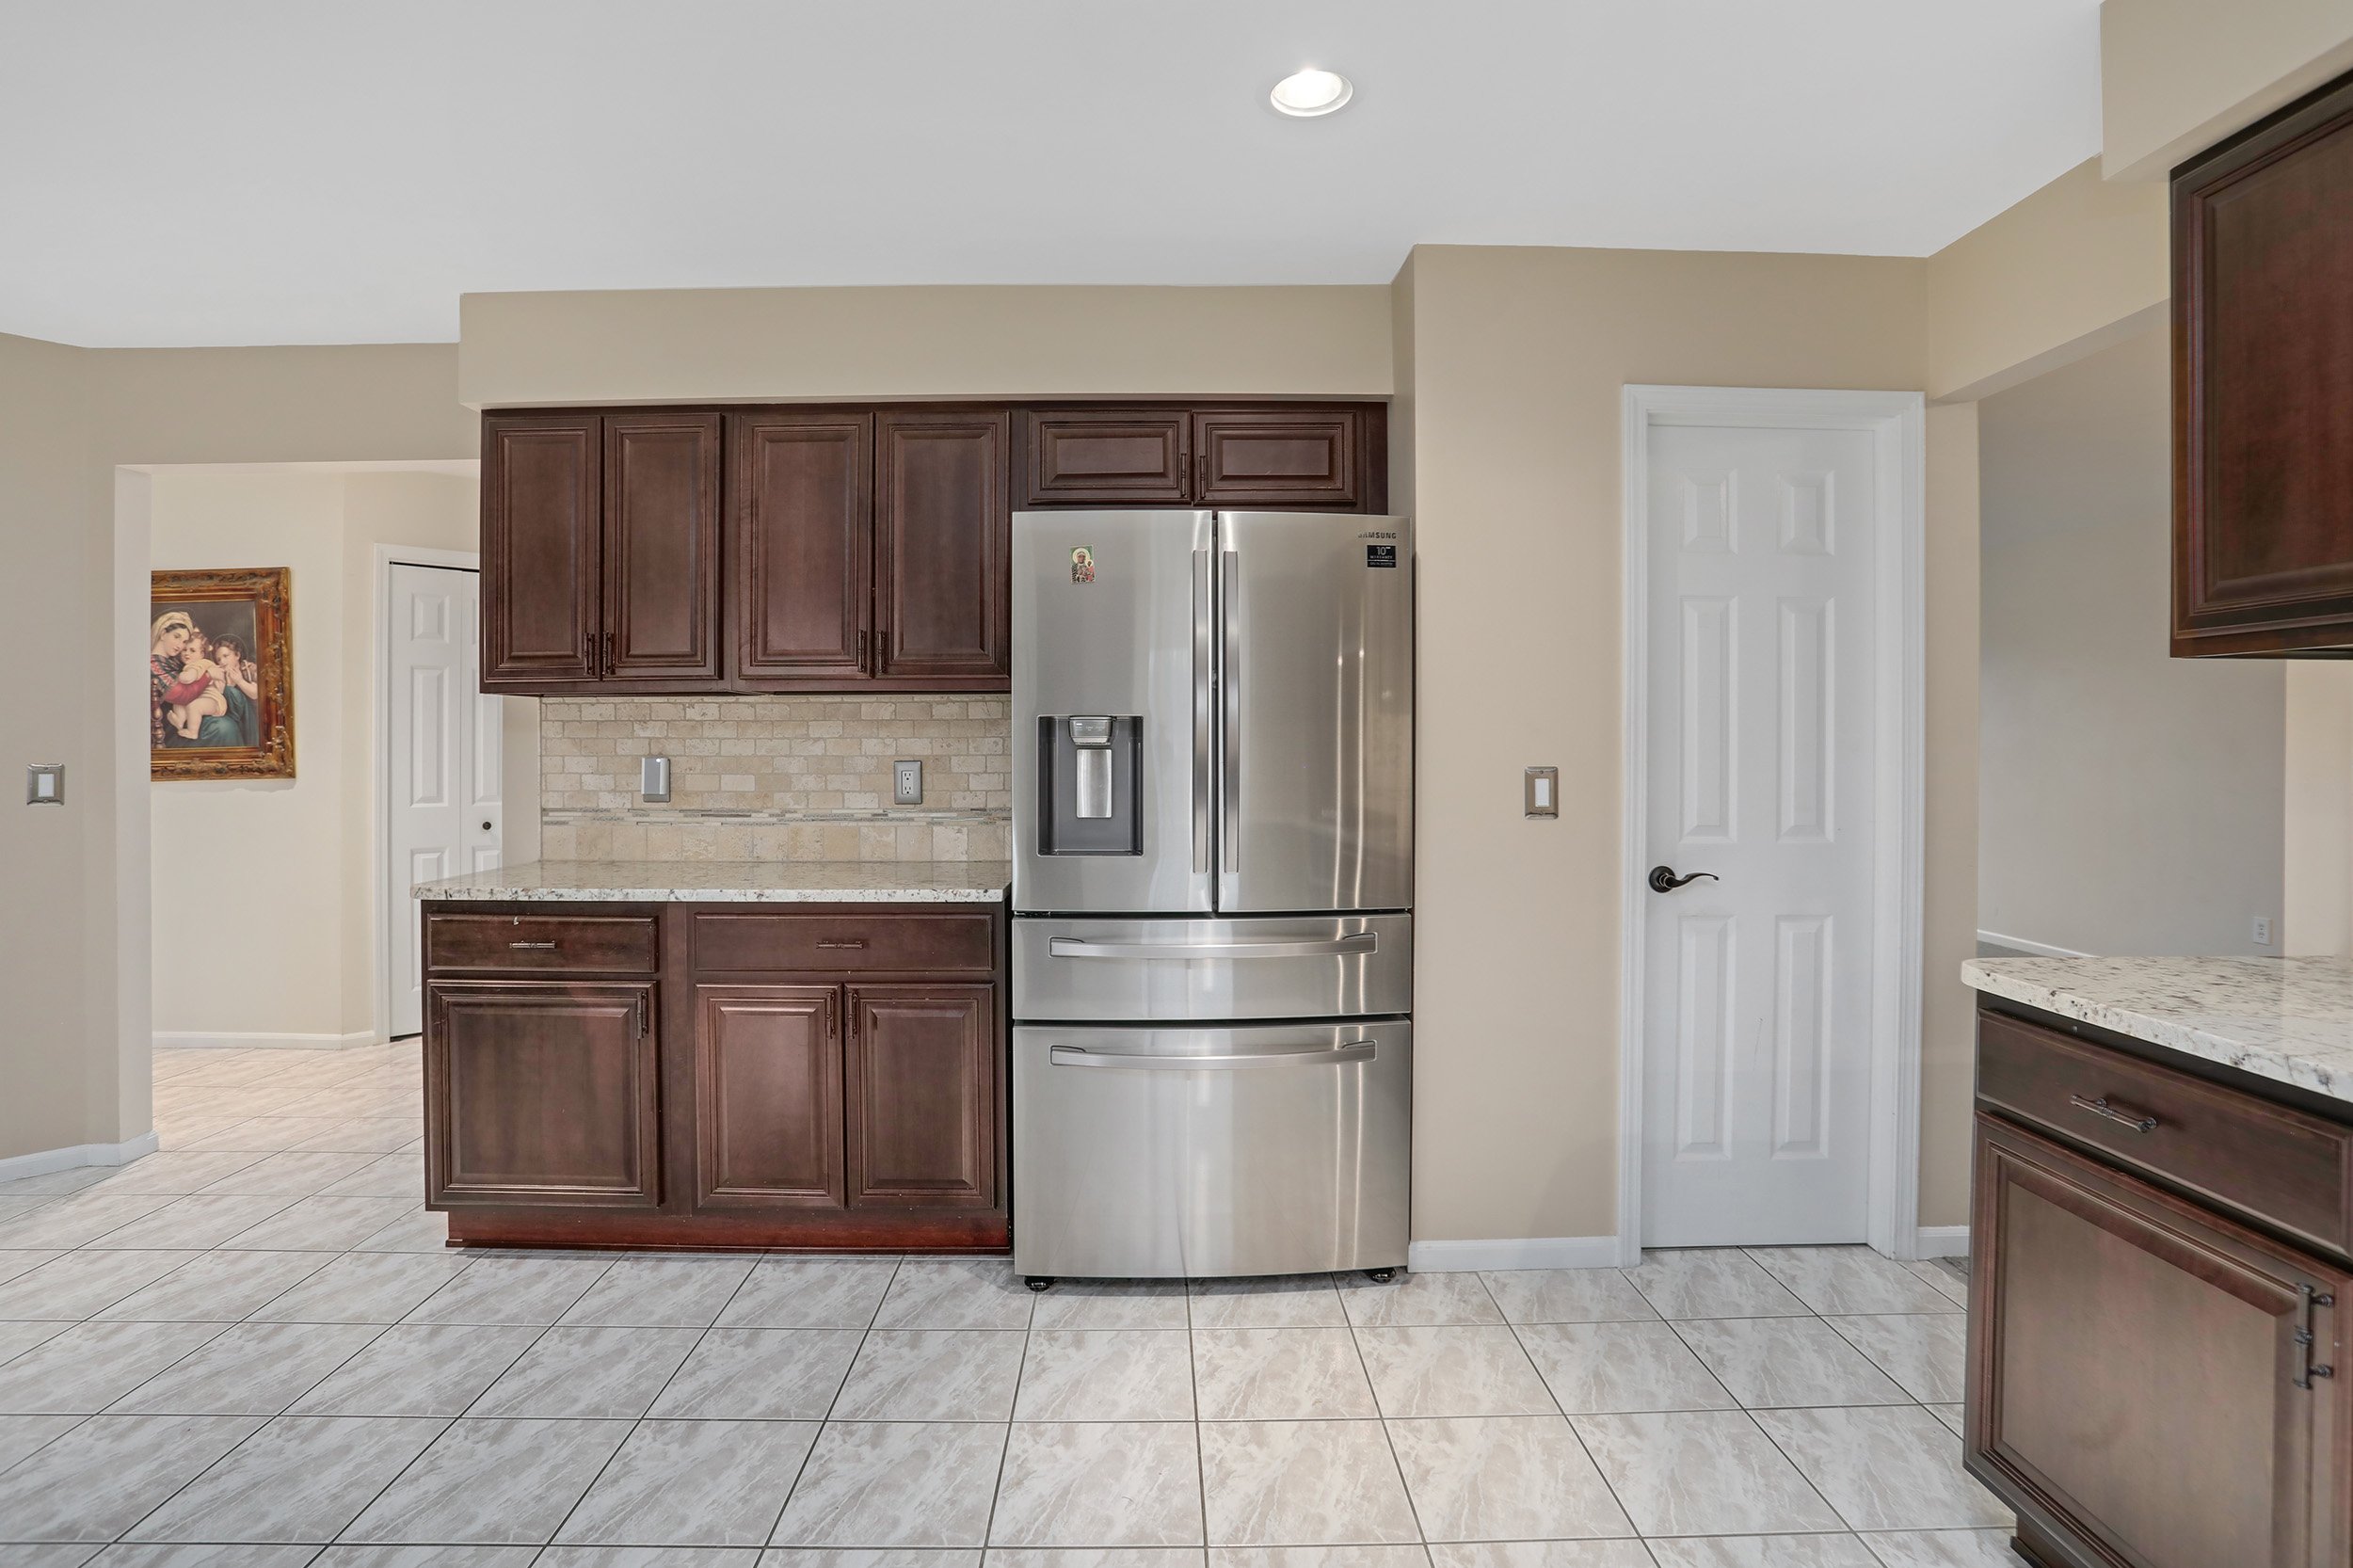  Sterling Heights Real Estate Photography - kitchen detail 